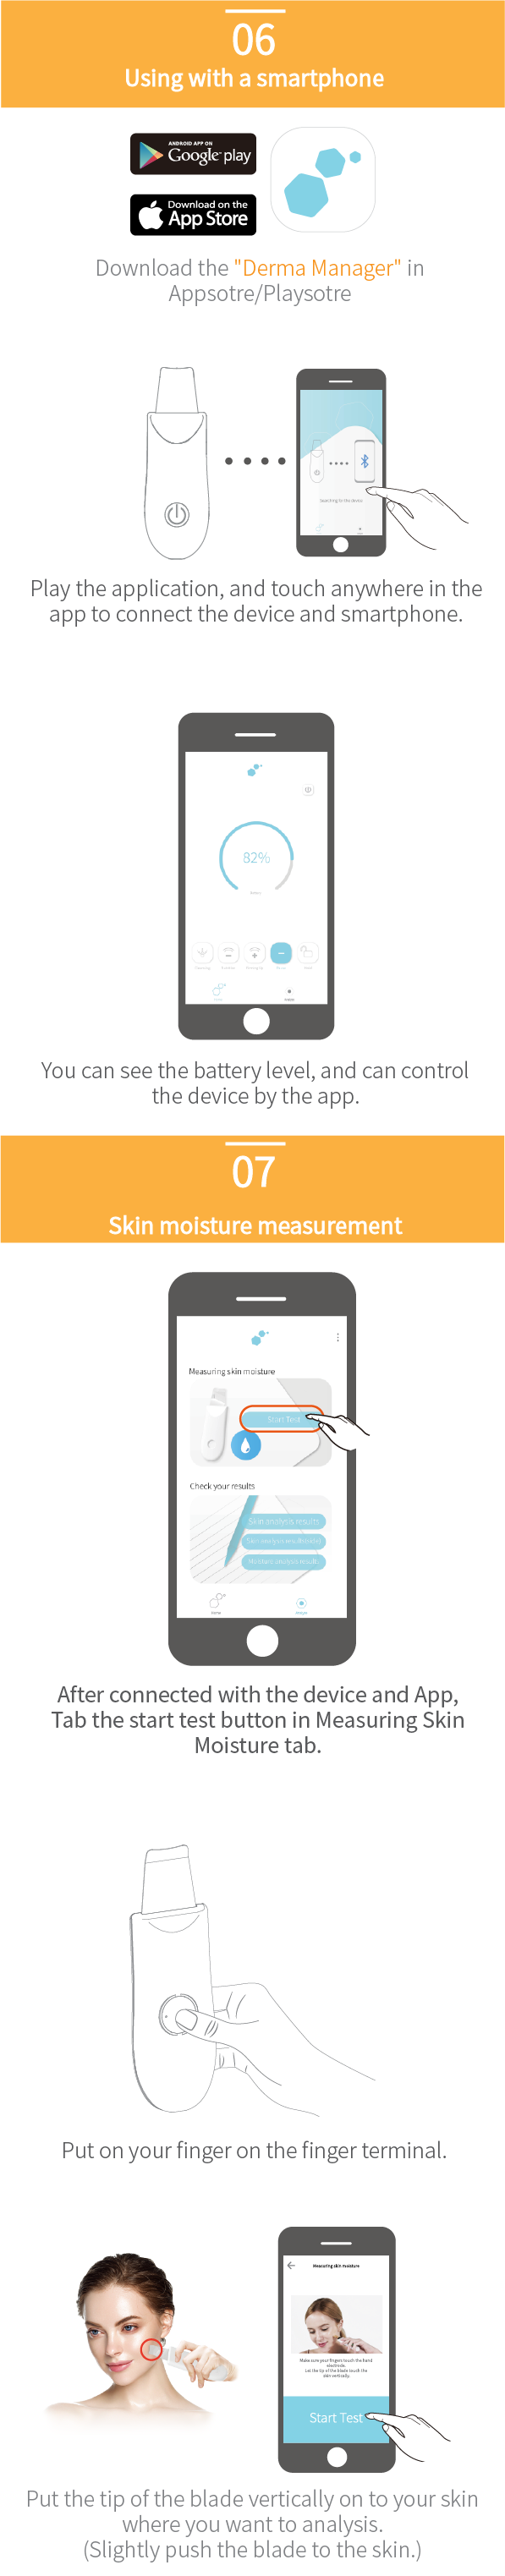 Derma F Gold +App (iOS, Android) - Smart Skin Analyzer, Homecare Smart Device, All in one Skin Analyze, Skincare